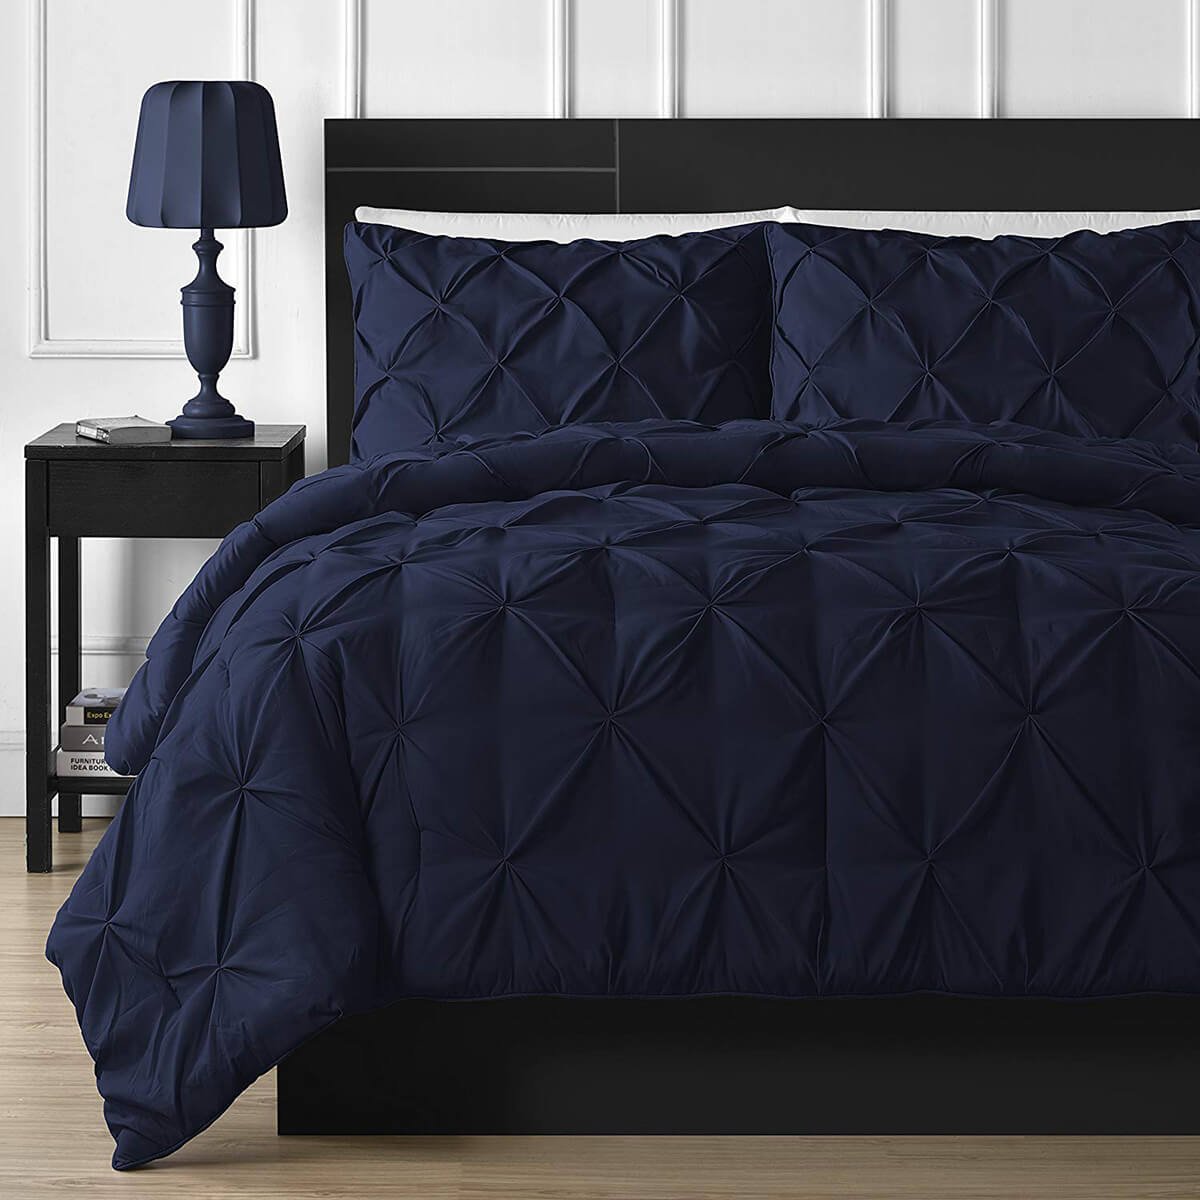 Positively Classic Style Bedding in Sumptuous Navy